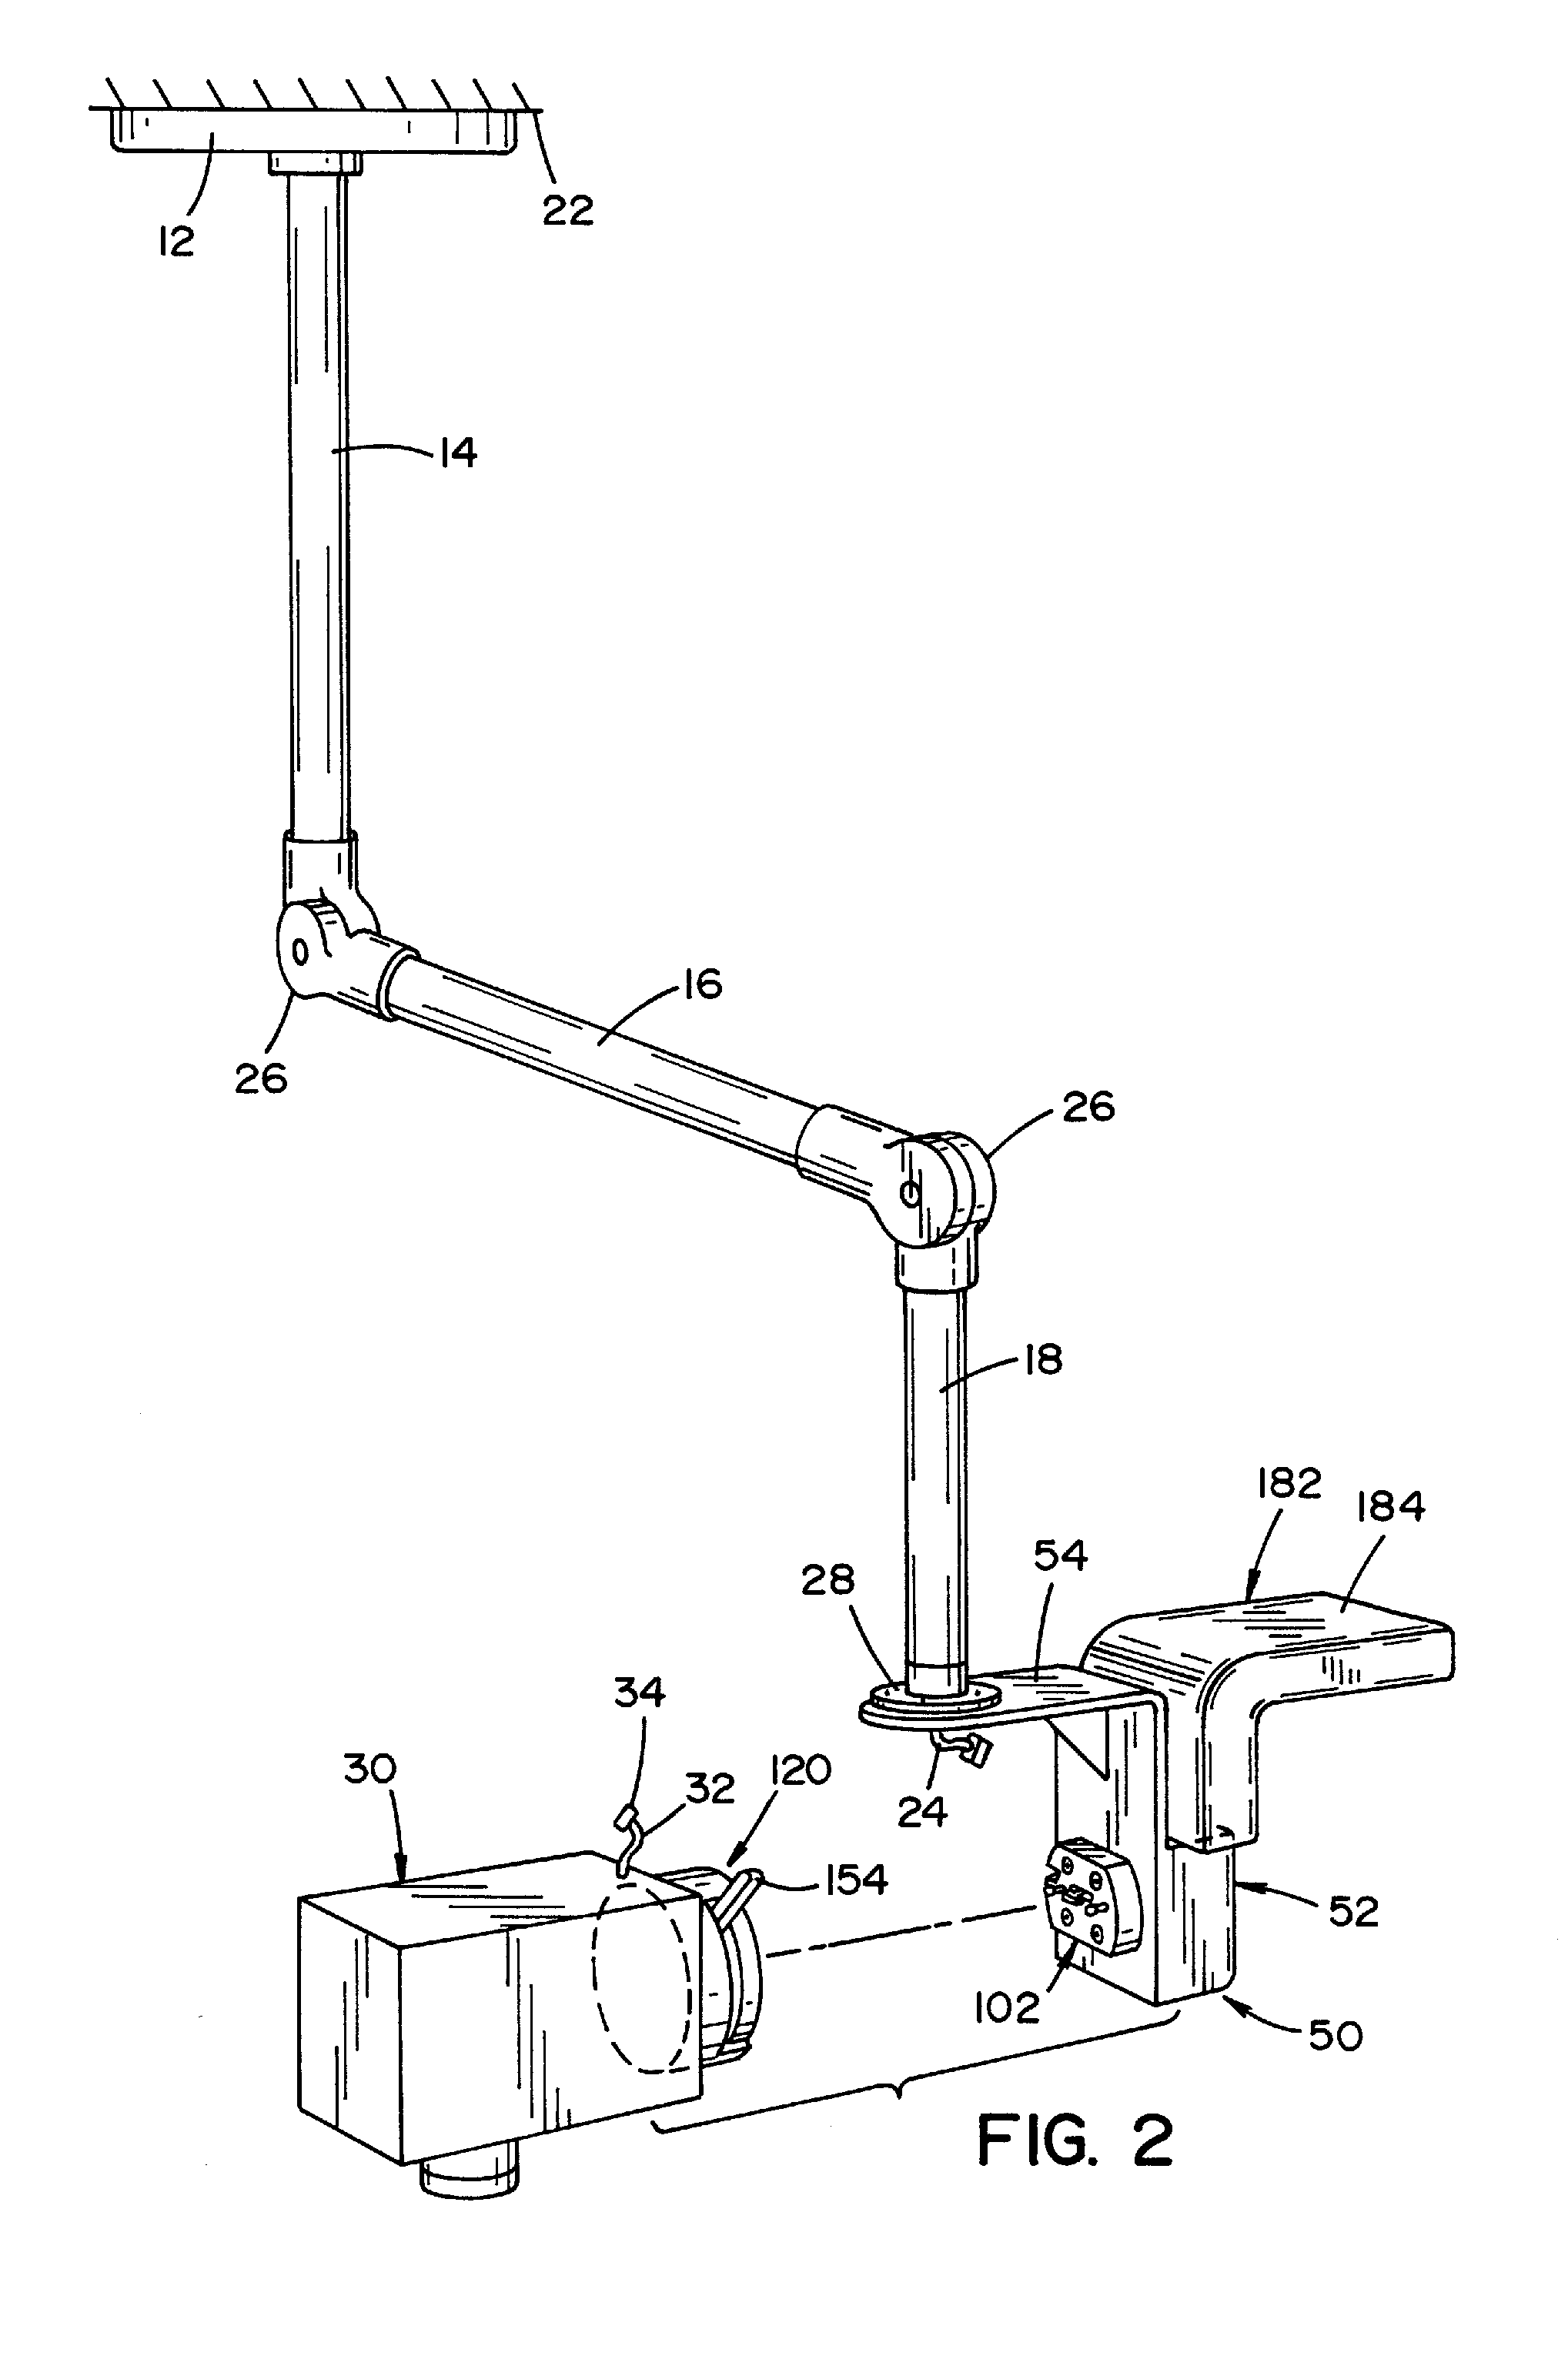 Connection system for mounting a device onto a support arm